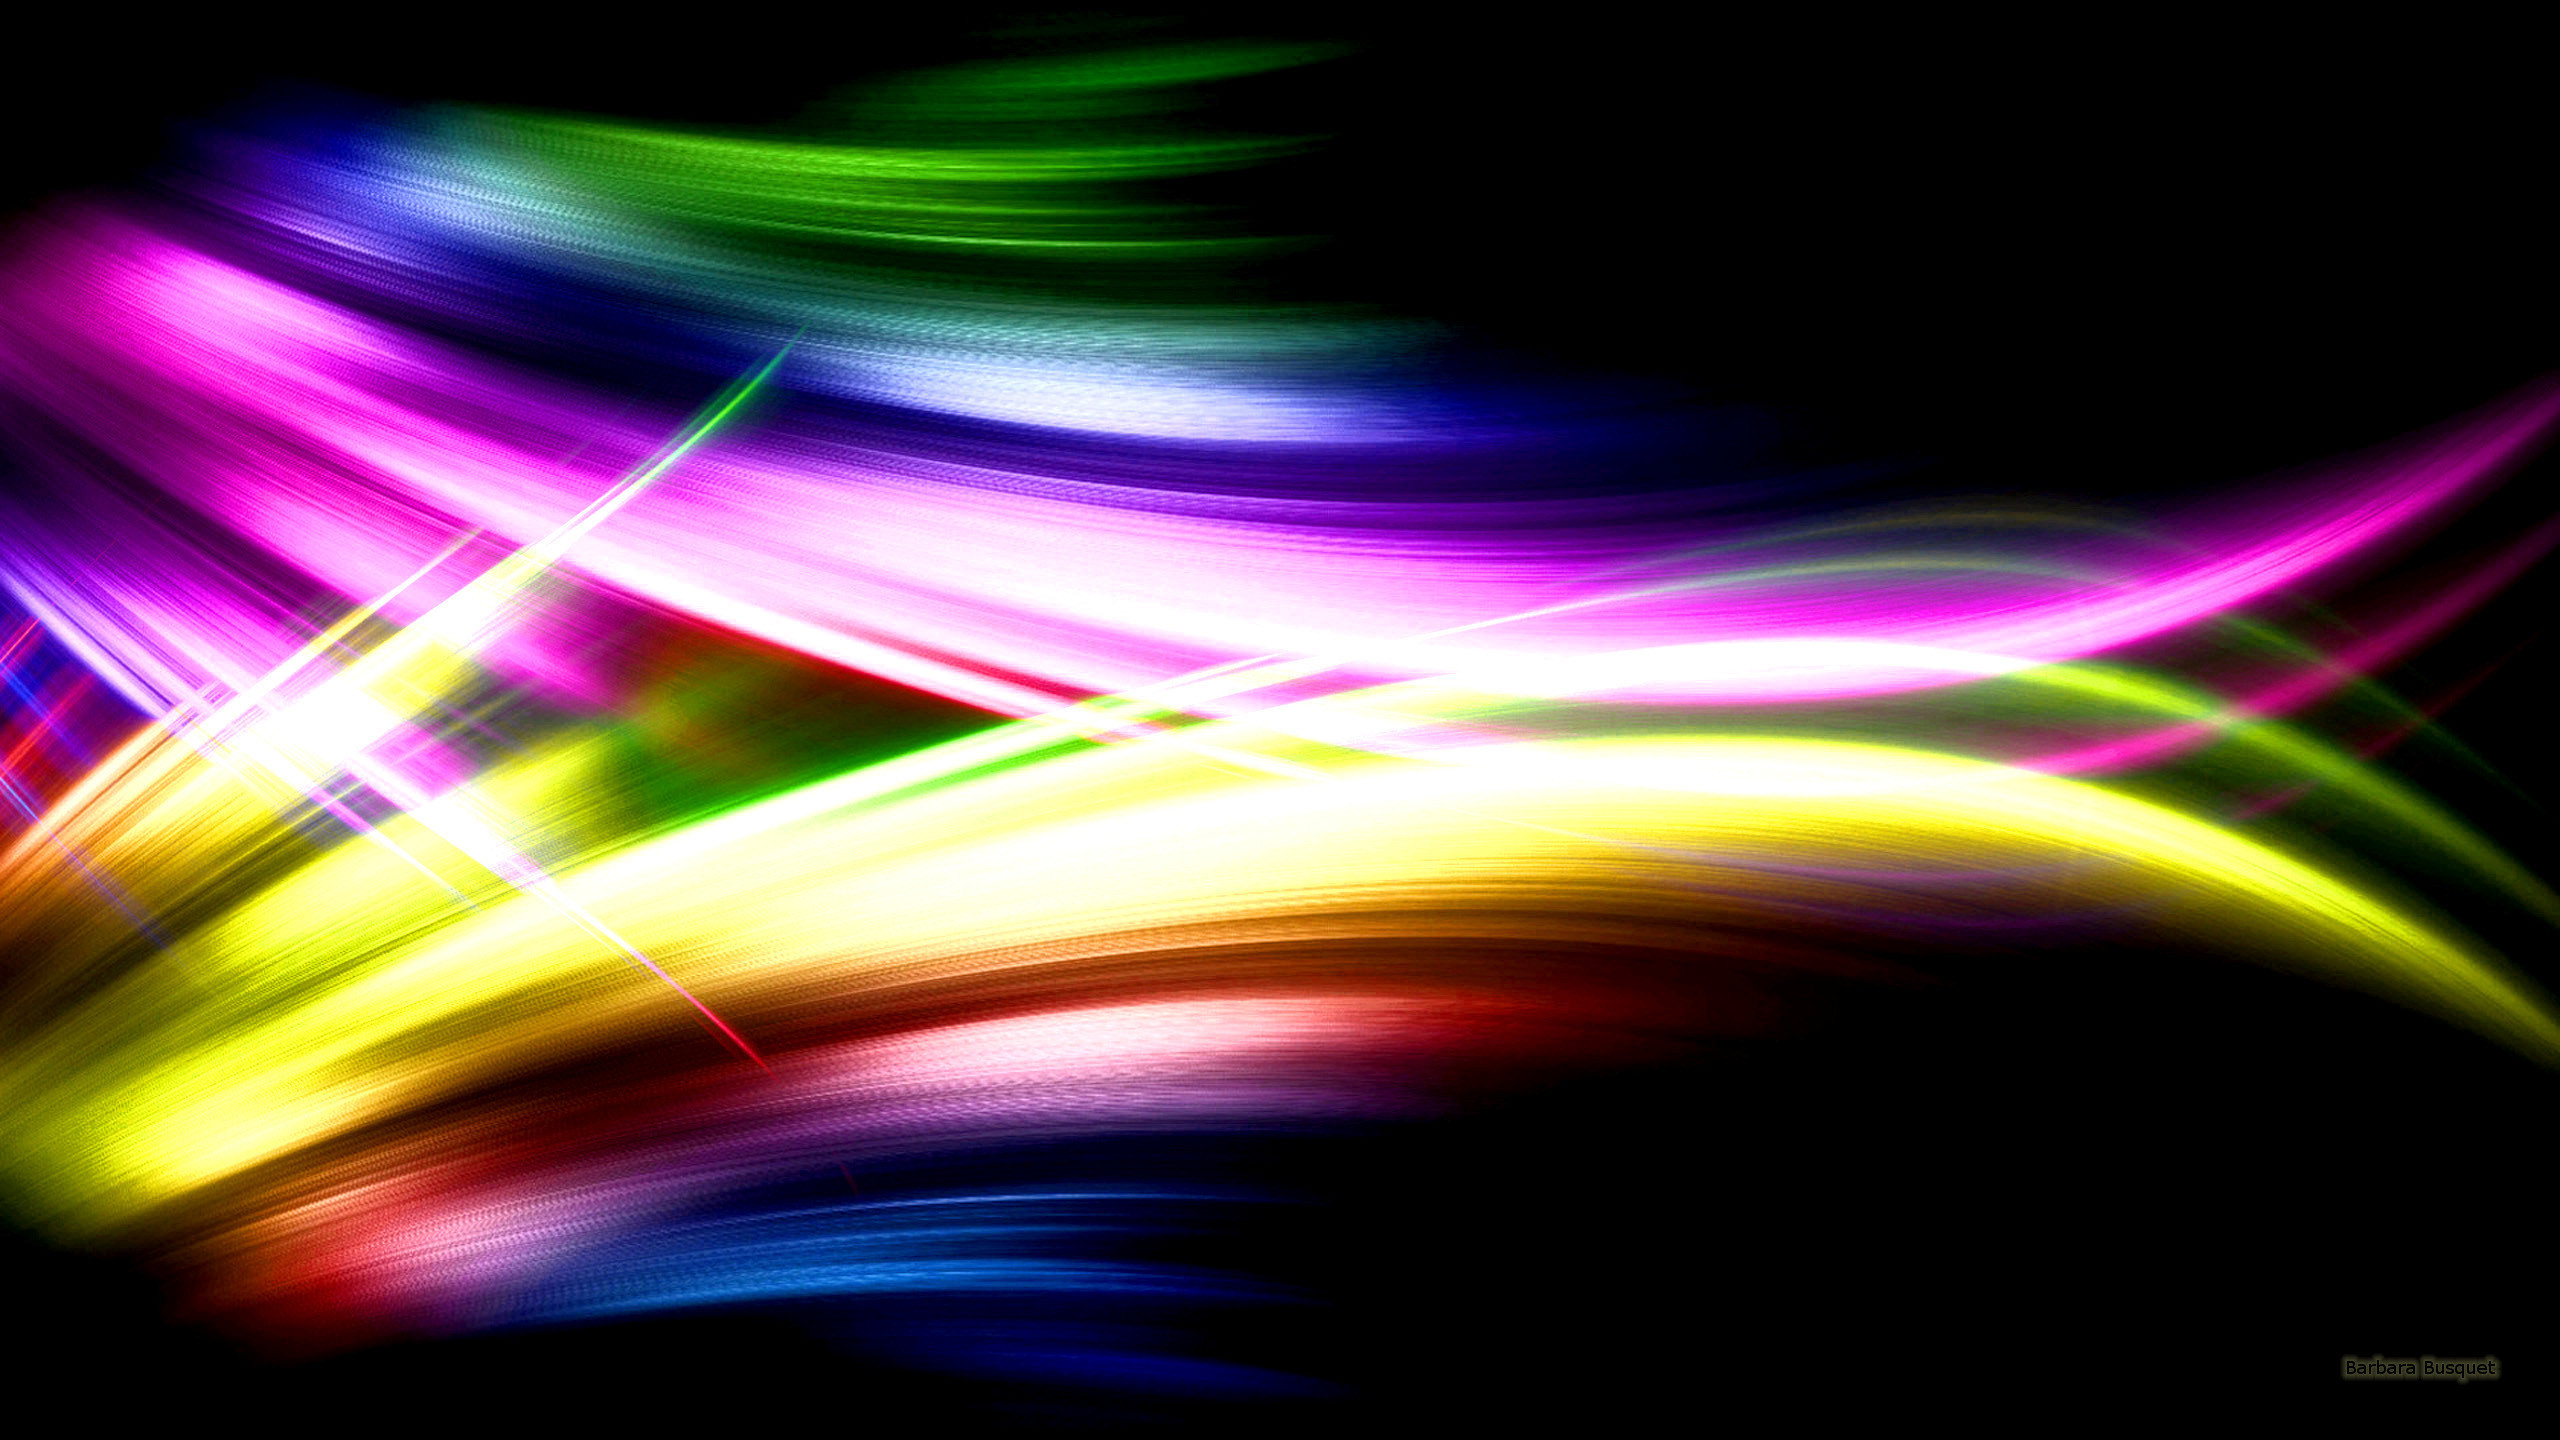 2560x1440 Dark abstract wallpaper with spectrum colors